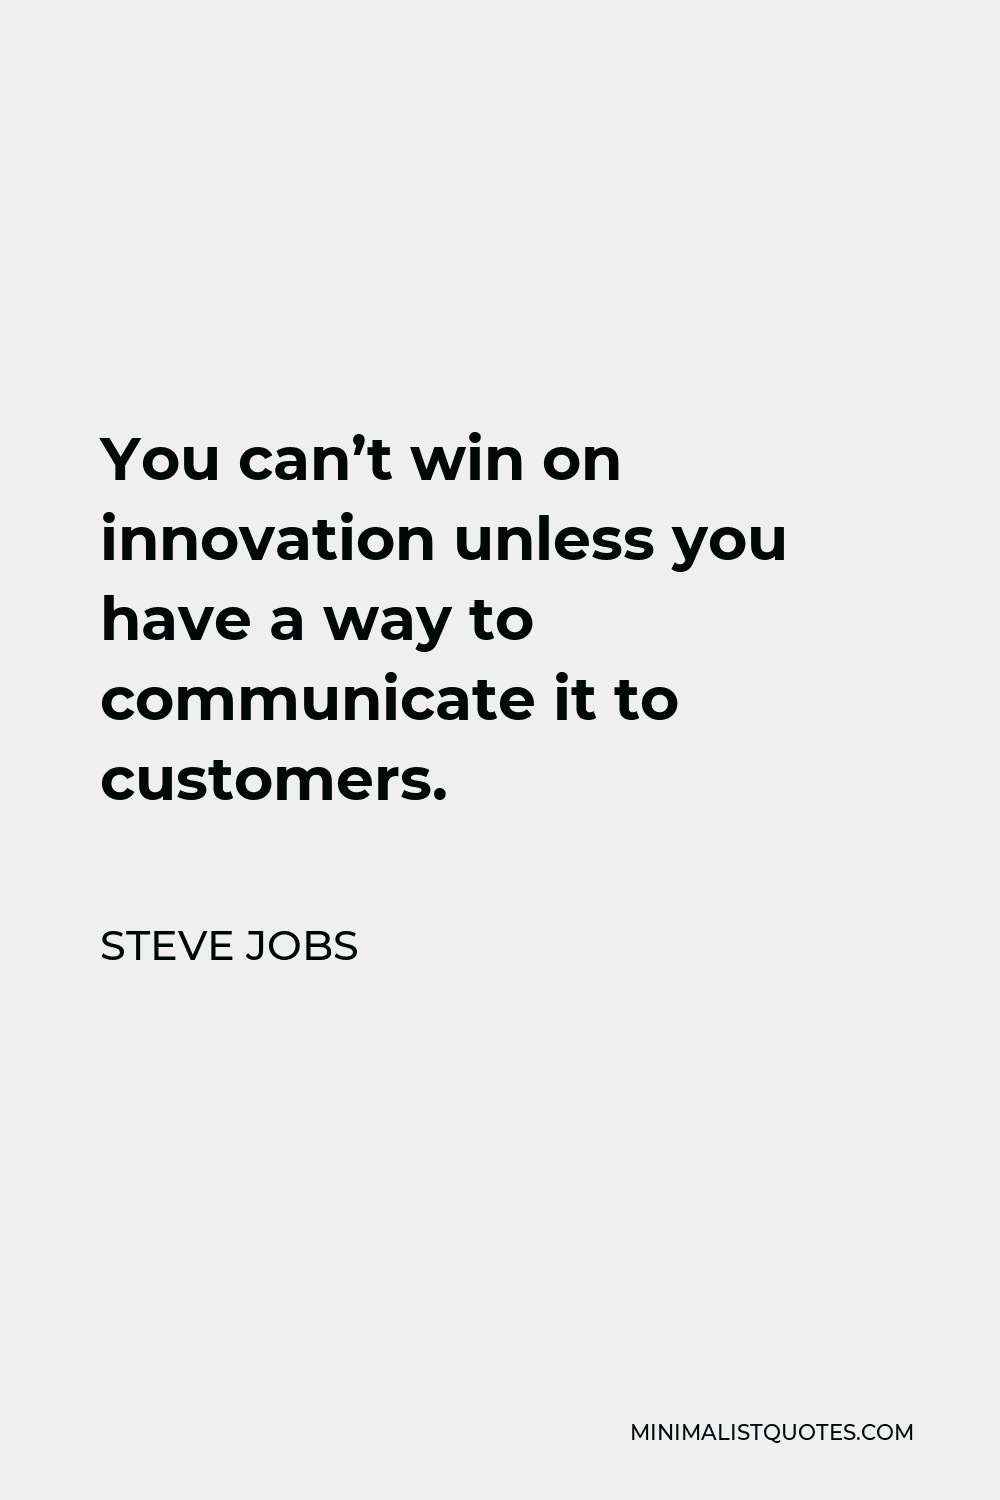 Steve Jobs Quote - You can’t win on innovation unless you have a way to communicate it to customers.